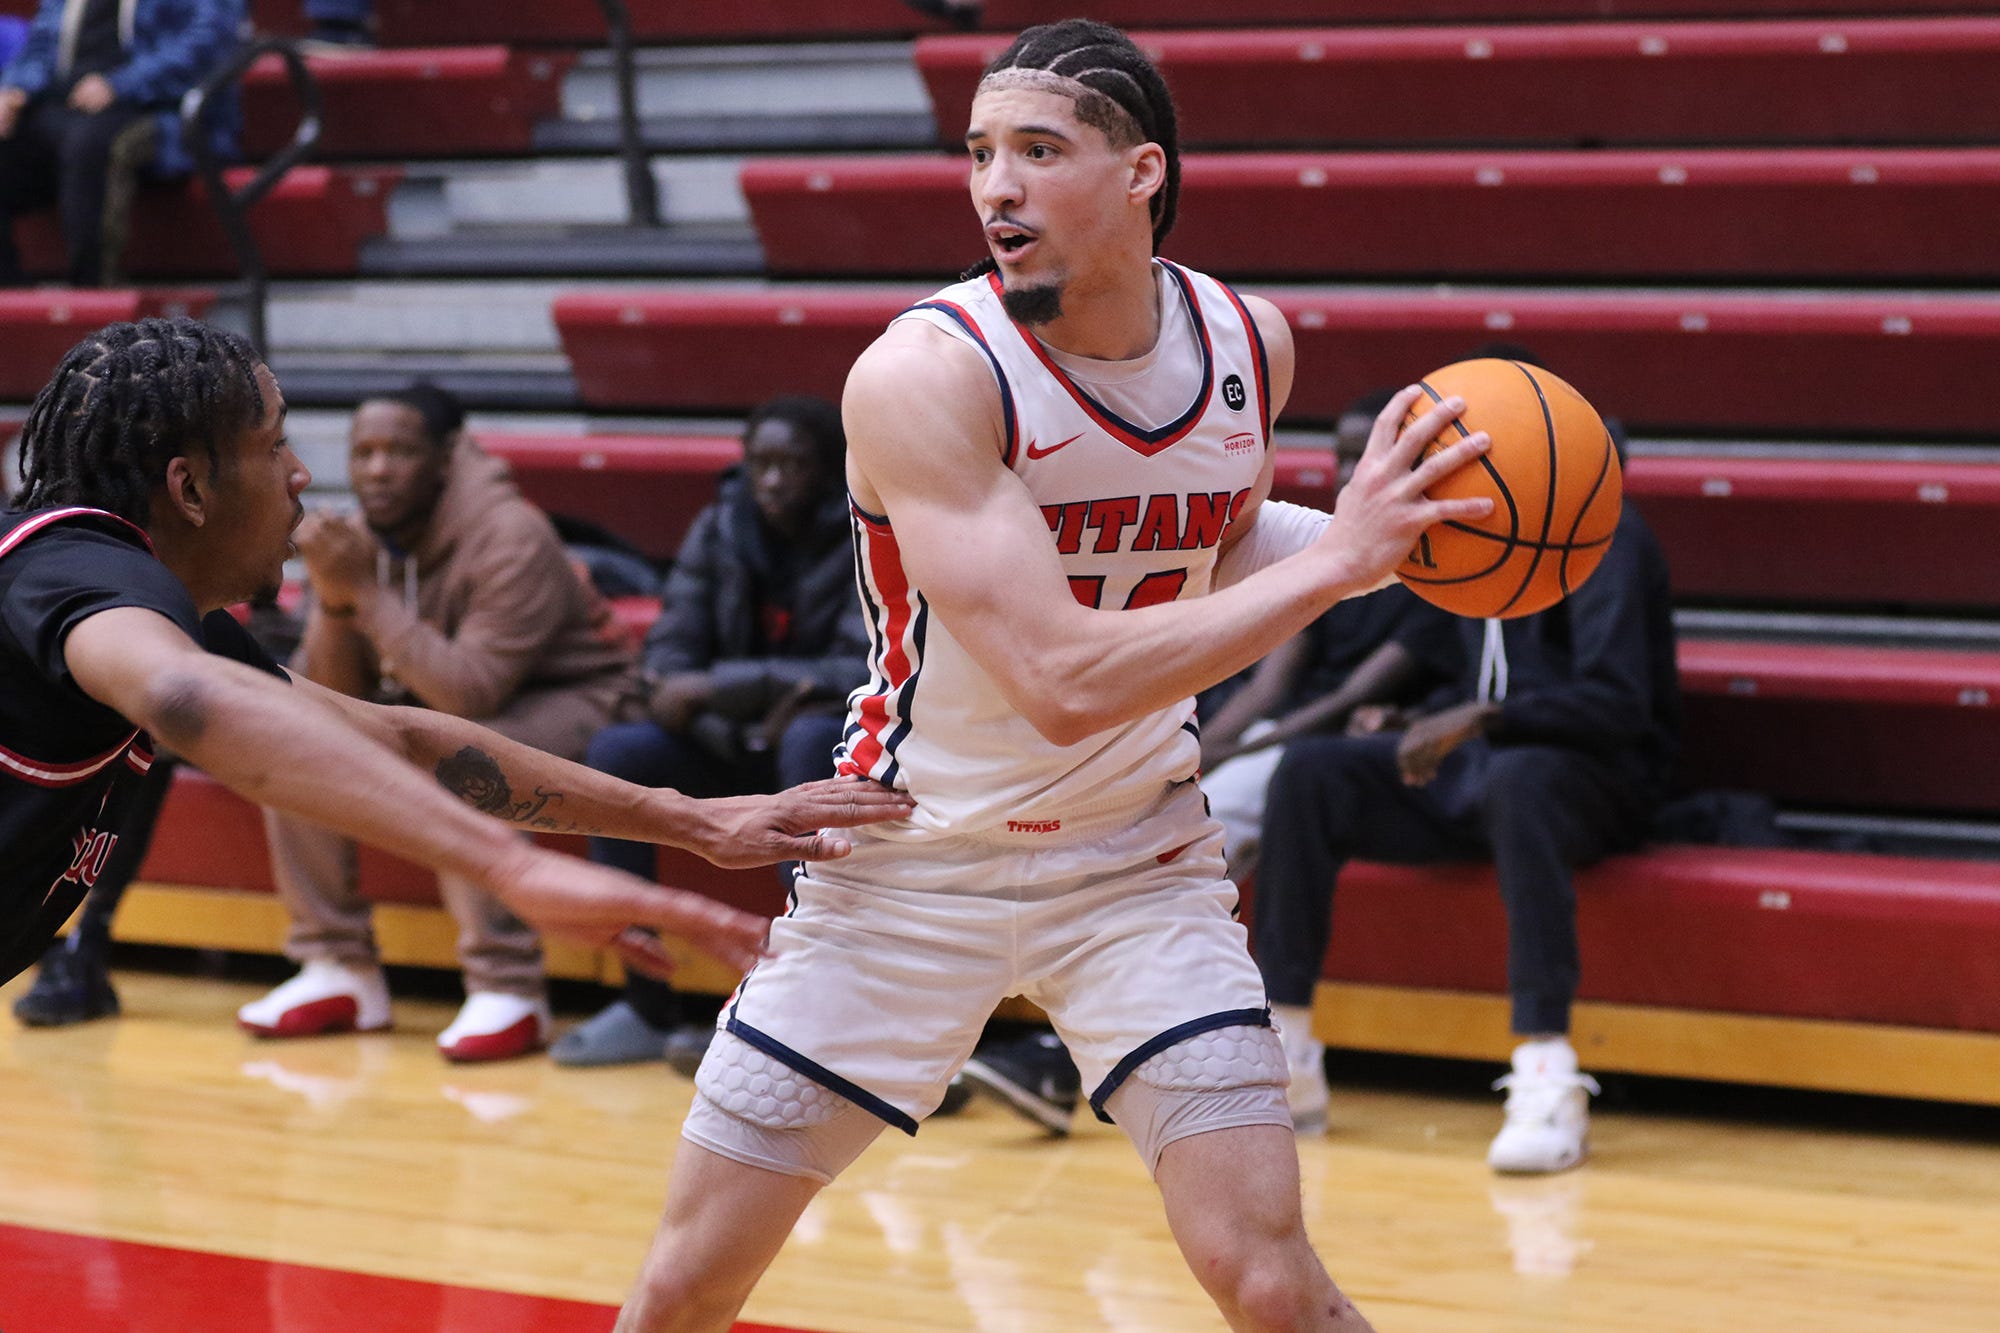 Senior guard Jayden Stone, the Horizon League's leading scorer, caught fire in the second half and finished with a game-high 25 points on 10-for-20 shooting to lead the Titans to victory on Wednesday against IUPUI.